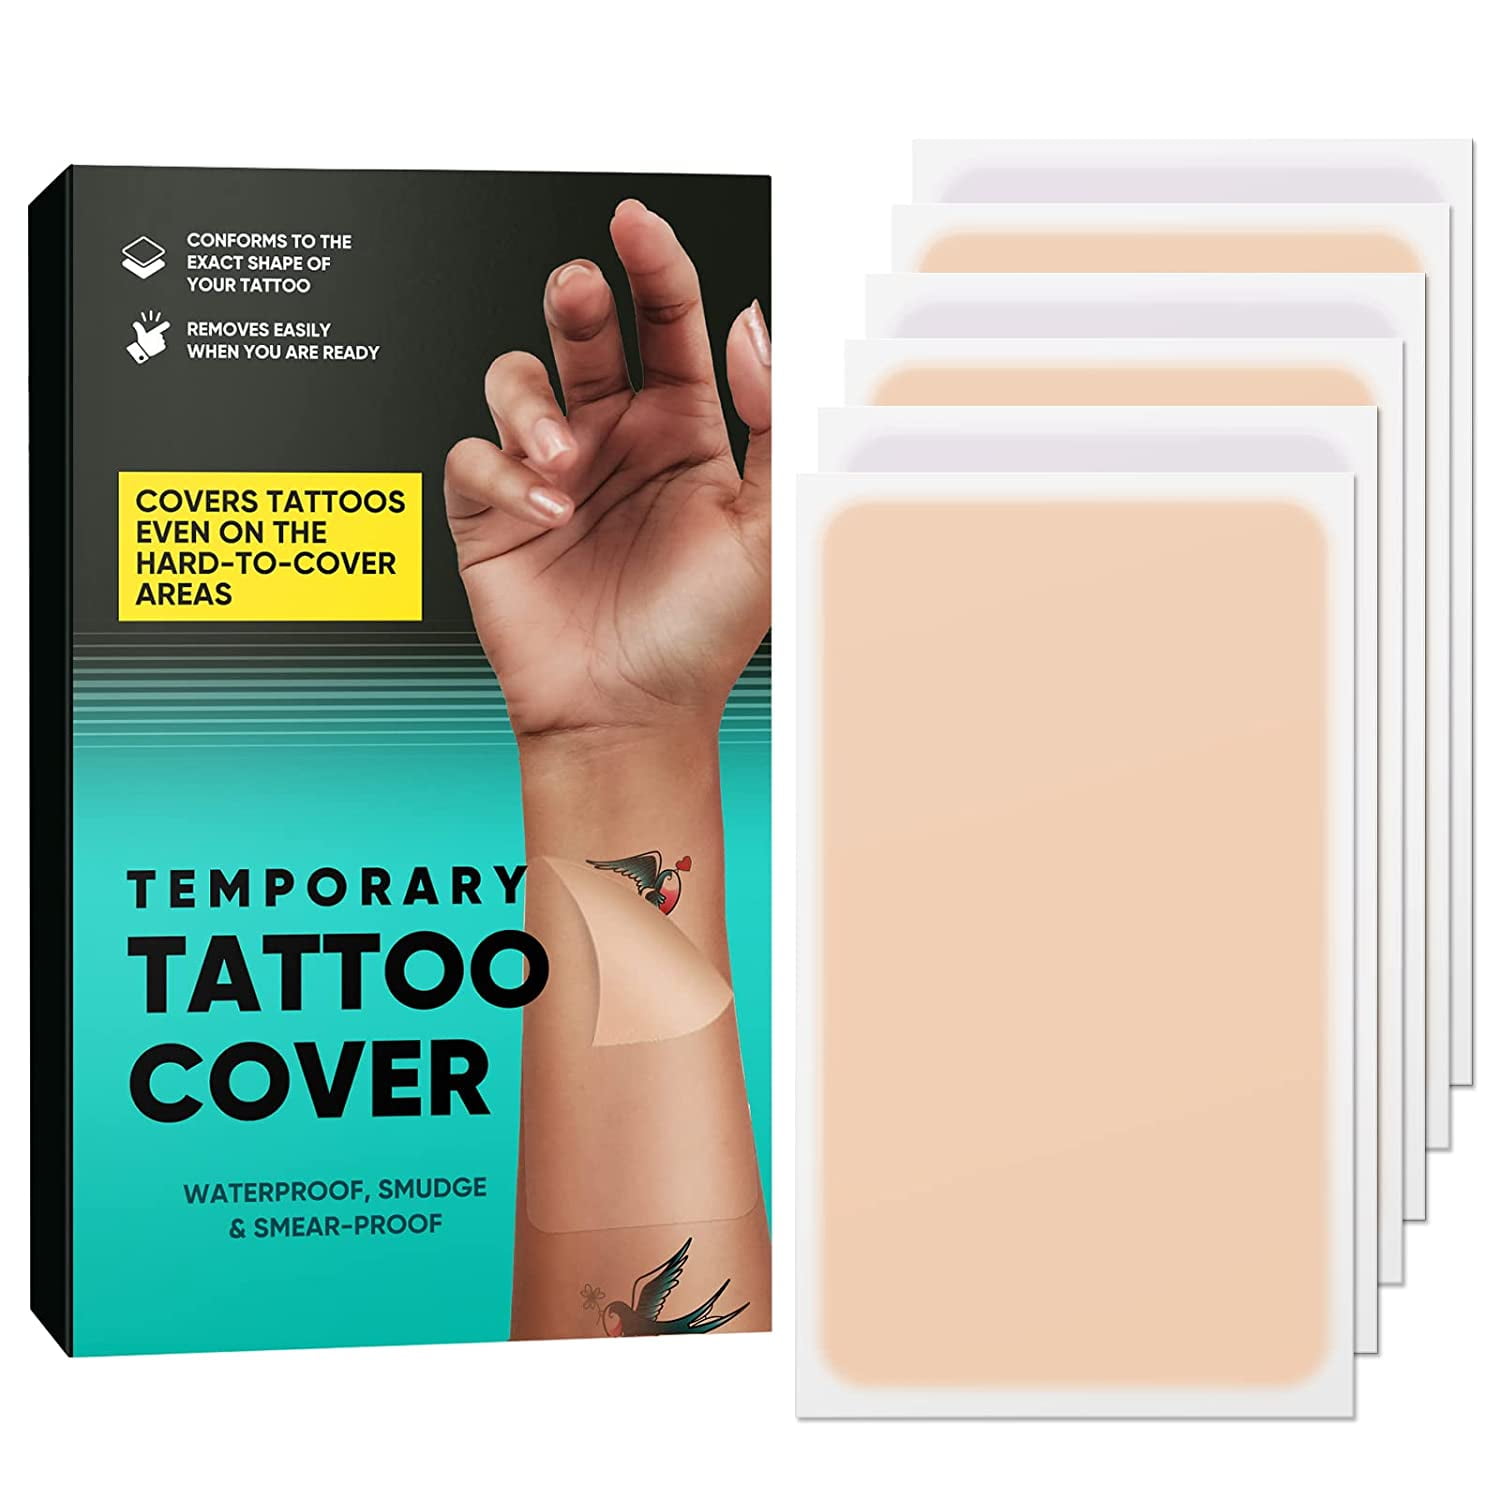 10 Best Makeup Products to Cover Tattoos  How to Hide Tattoos